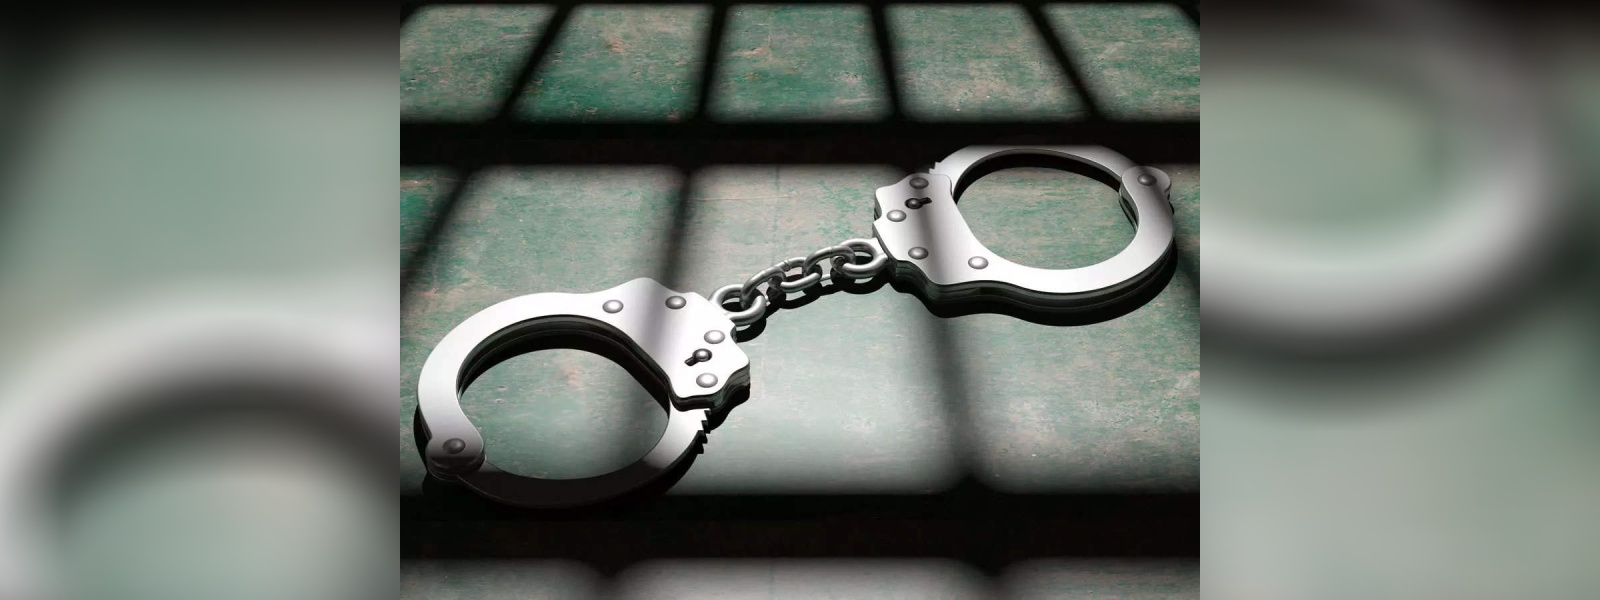 Six arrested in Dematagoda while abducting man and woman